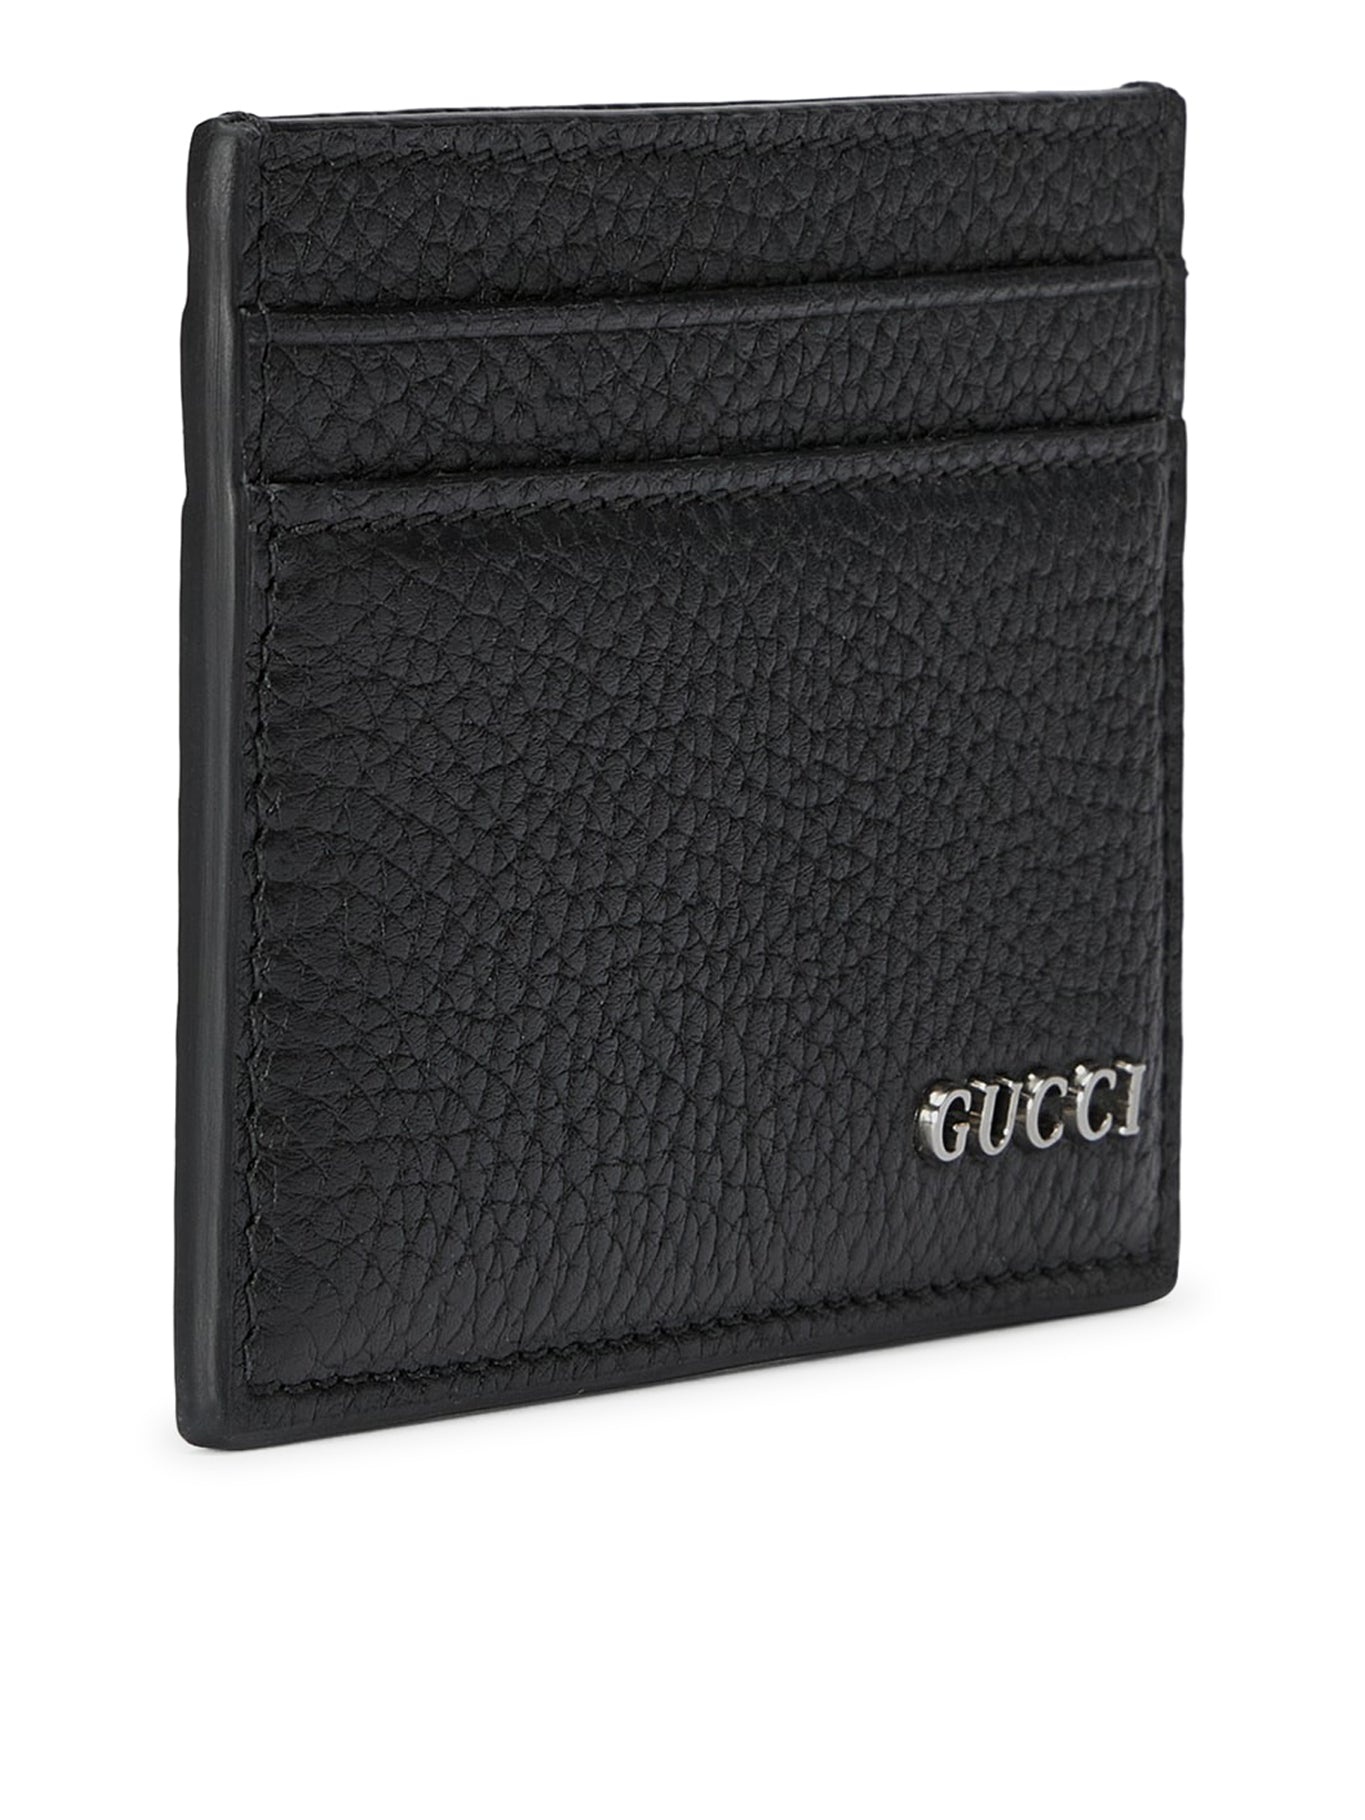 CARD HOLDER WITH GUCCI LOGO - 2